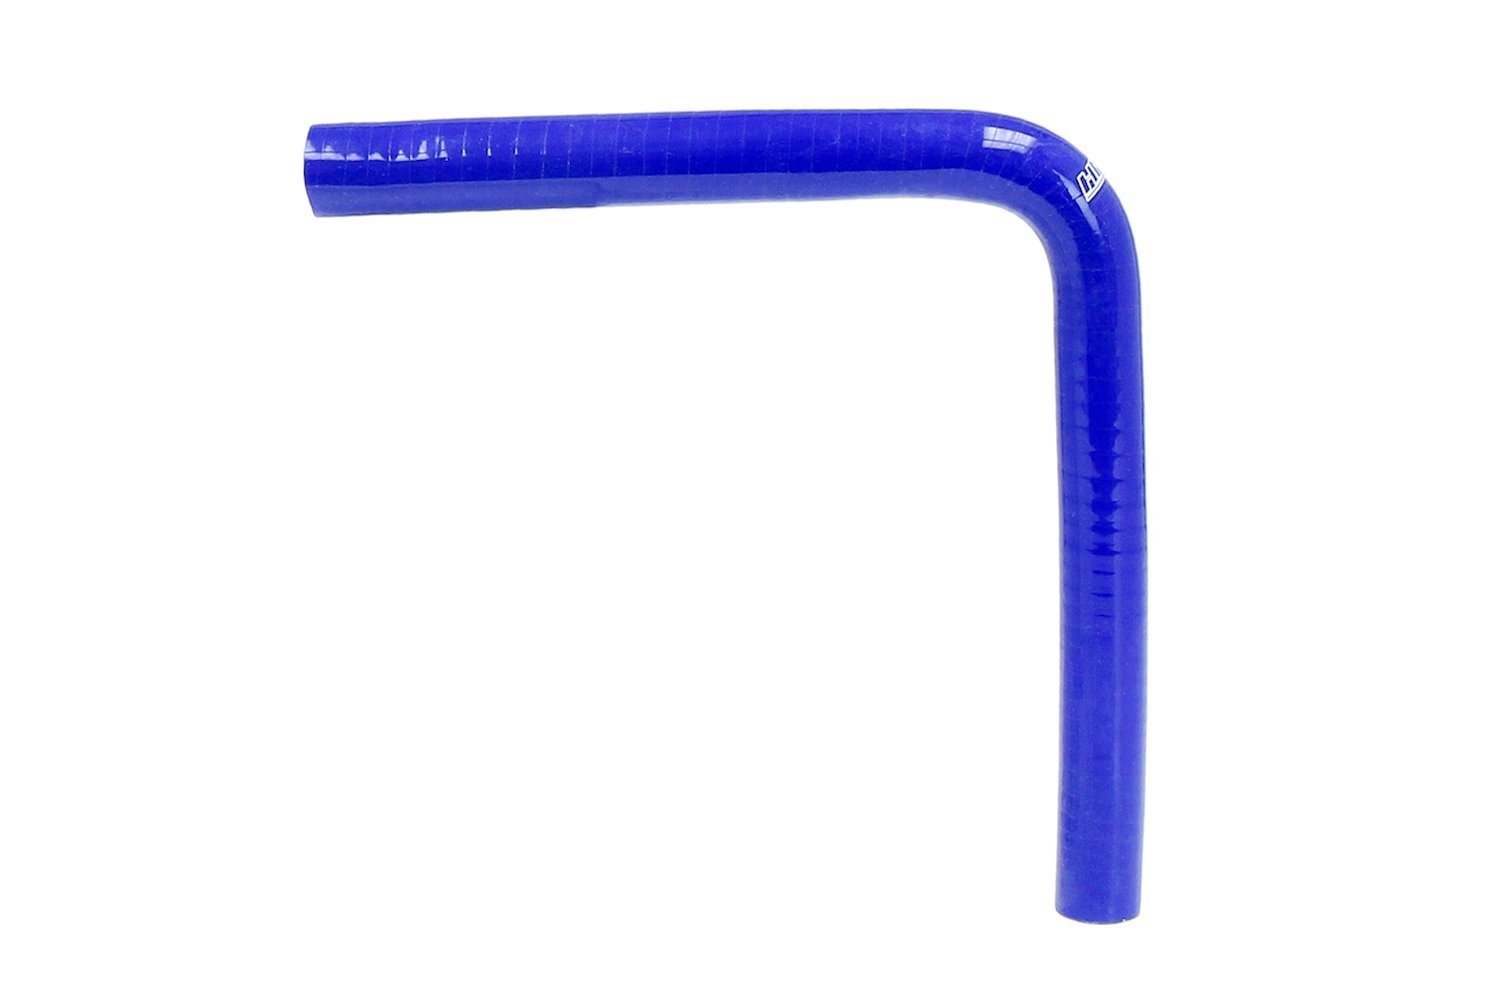 HTSEC90-125-BLUE Silicone 90-Degree Elbow Coupler Hose, High-Temp 4-Ply Reinforced, 1-1/4 in. ID, Blue